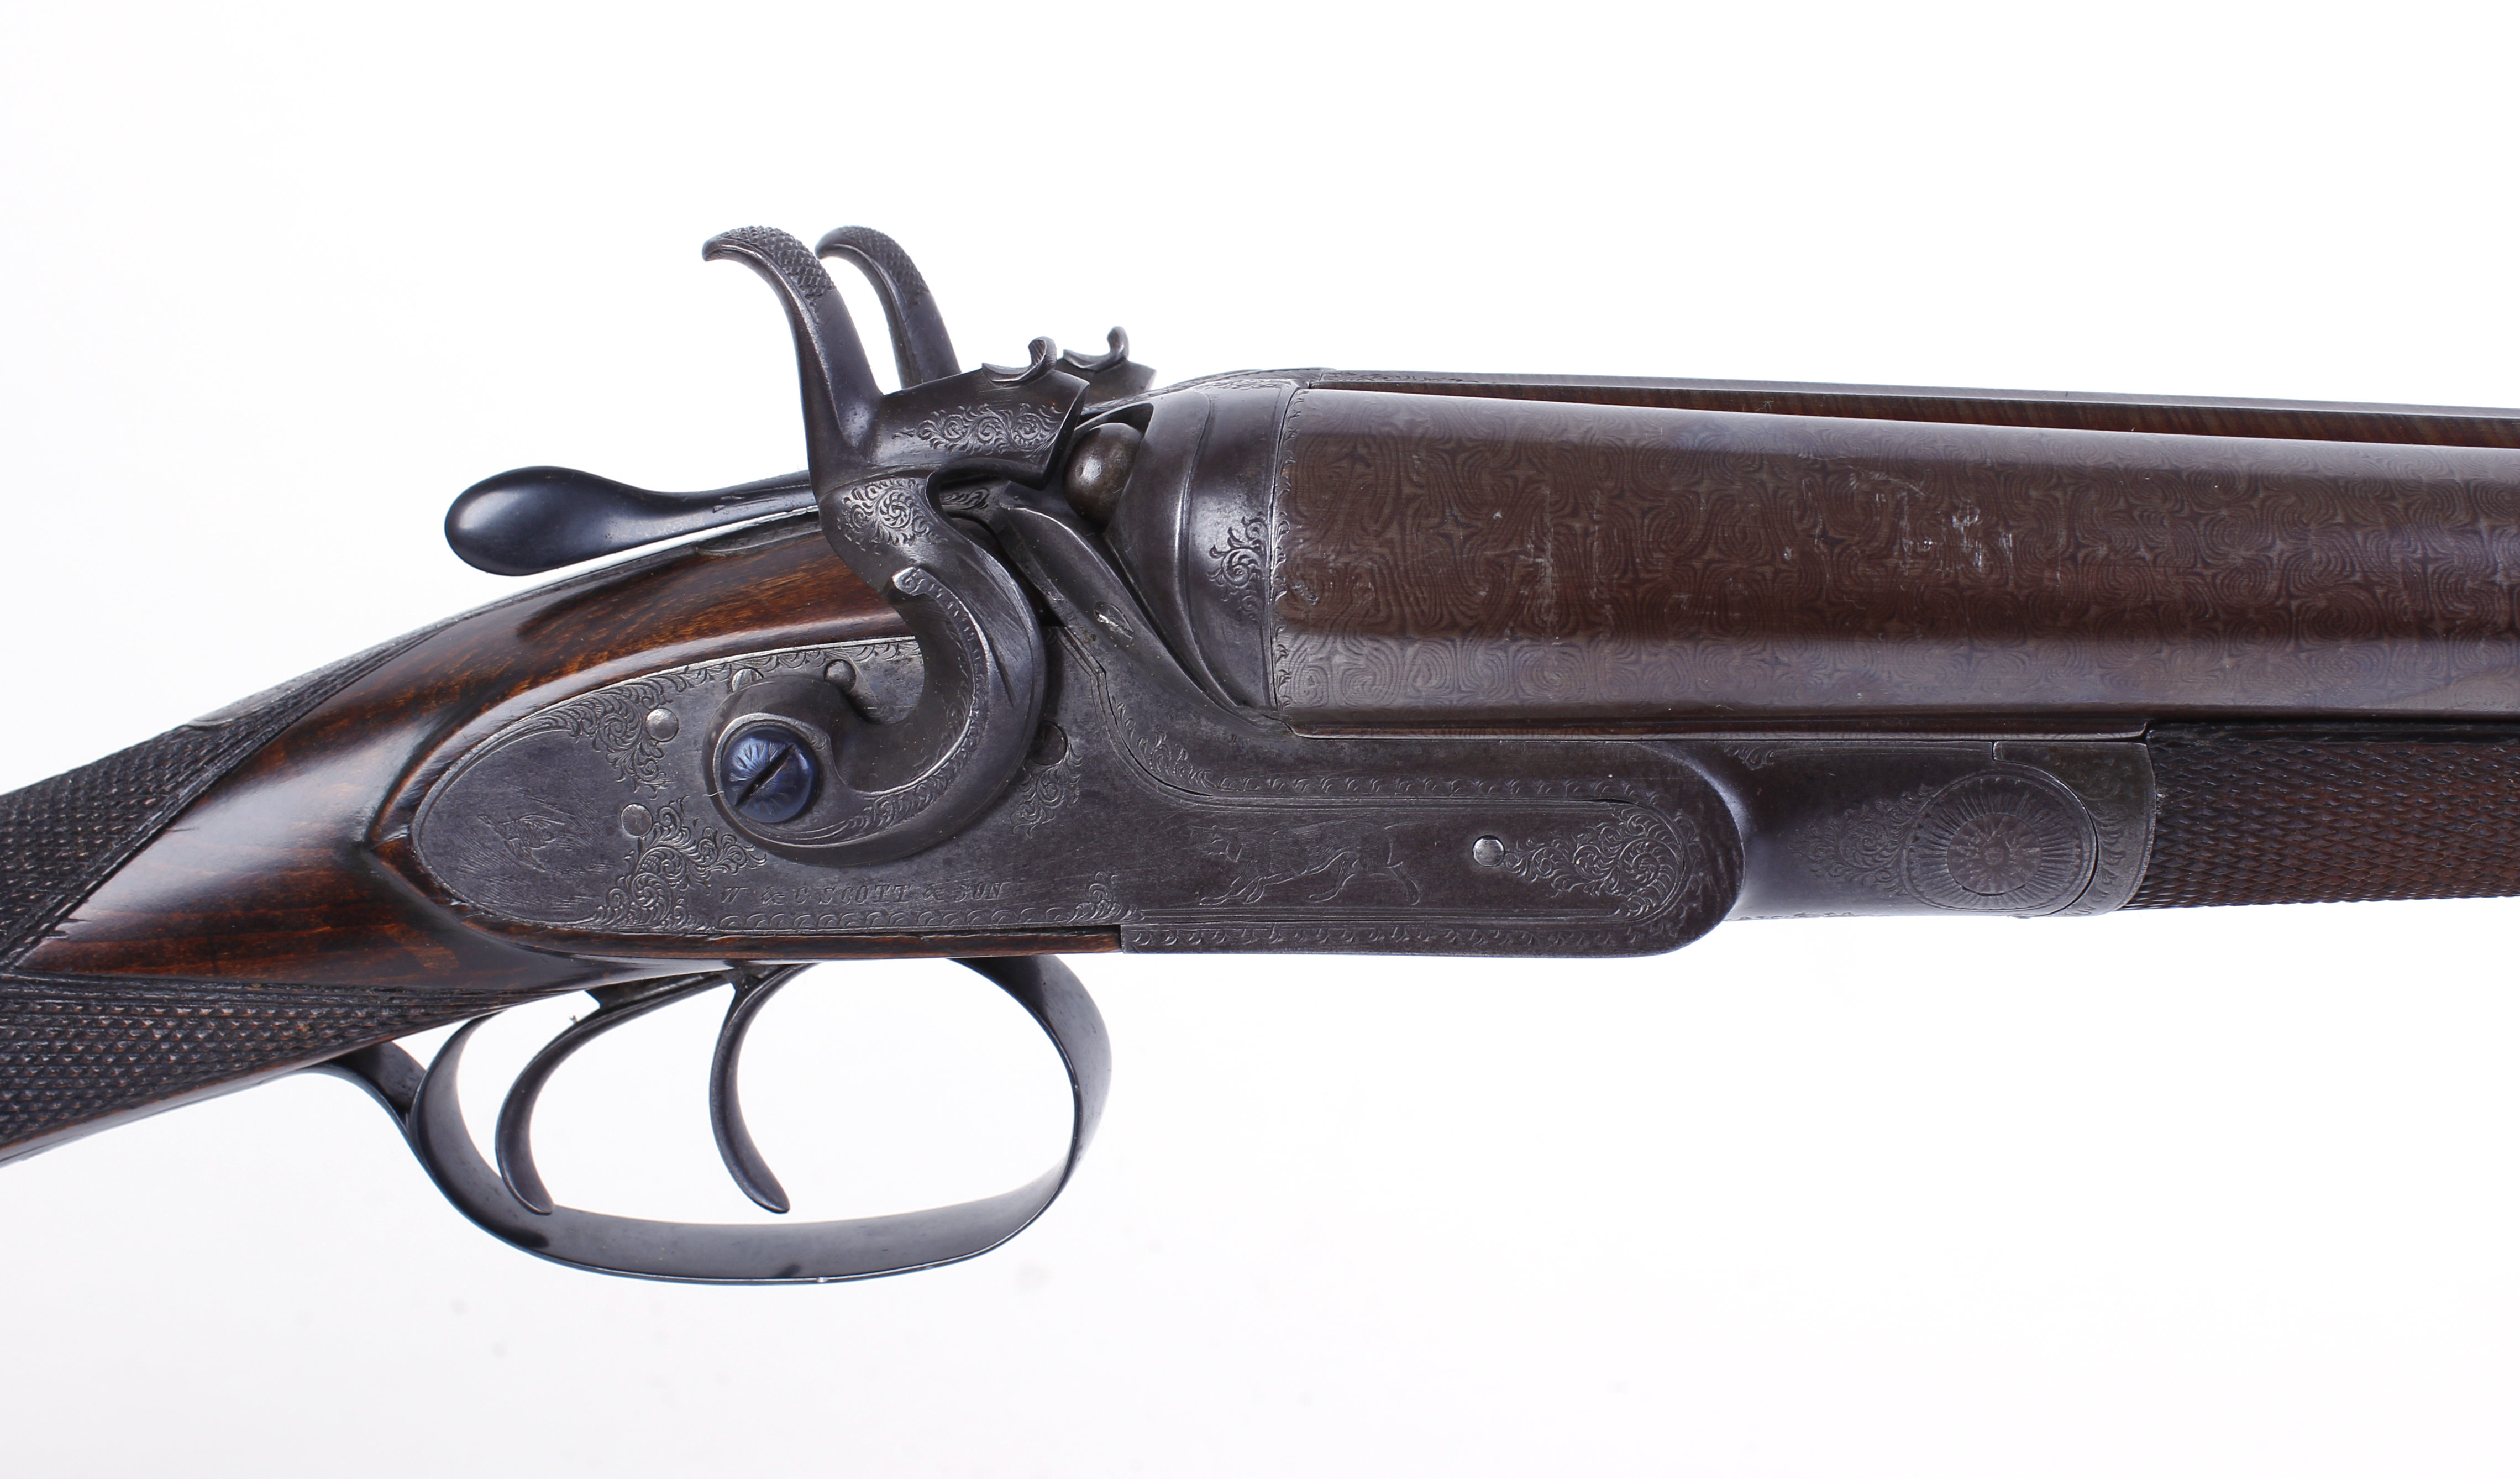 S2 12 bore double hammer gun by W. C. Scott, c.1880, 30 ins brown damascus barrels inscribed W & C - Image 3 of 4